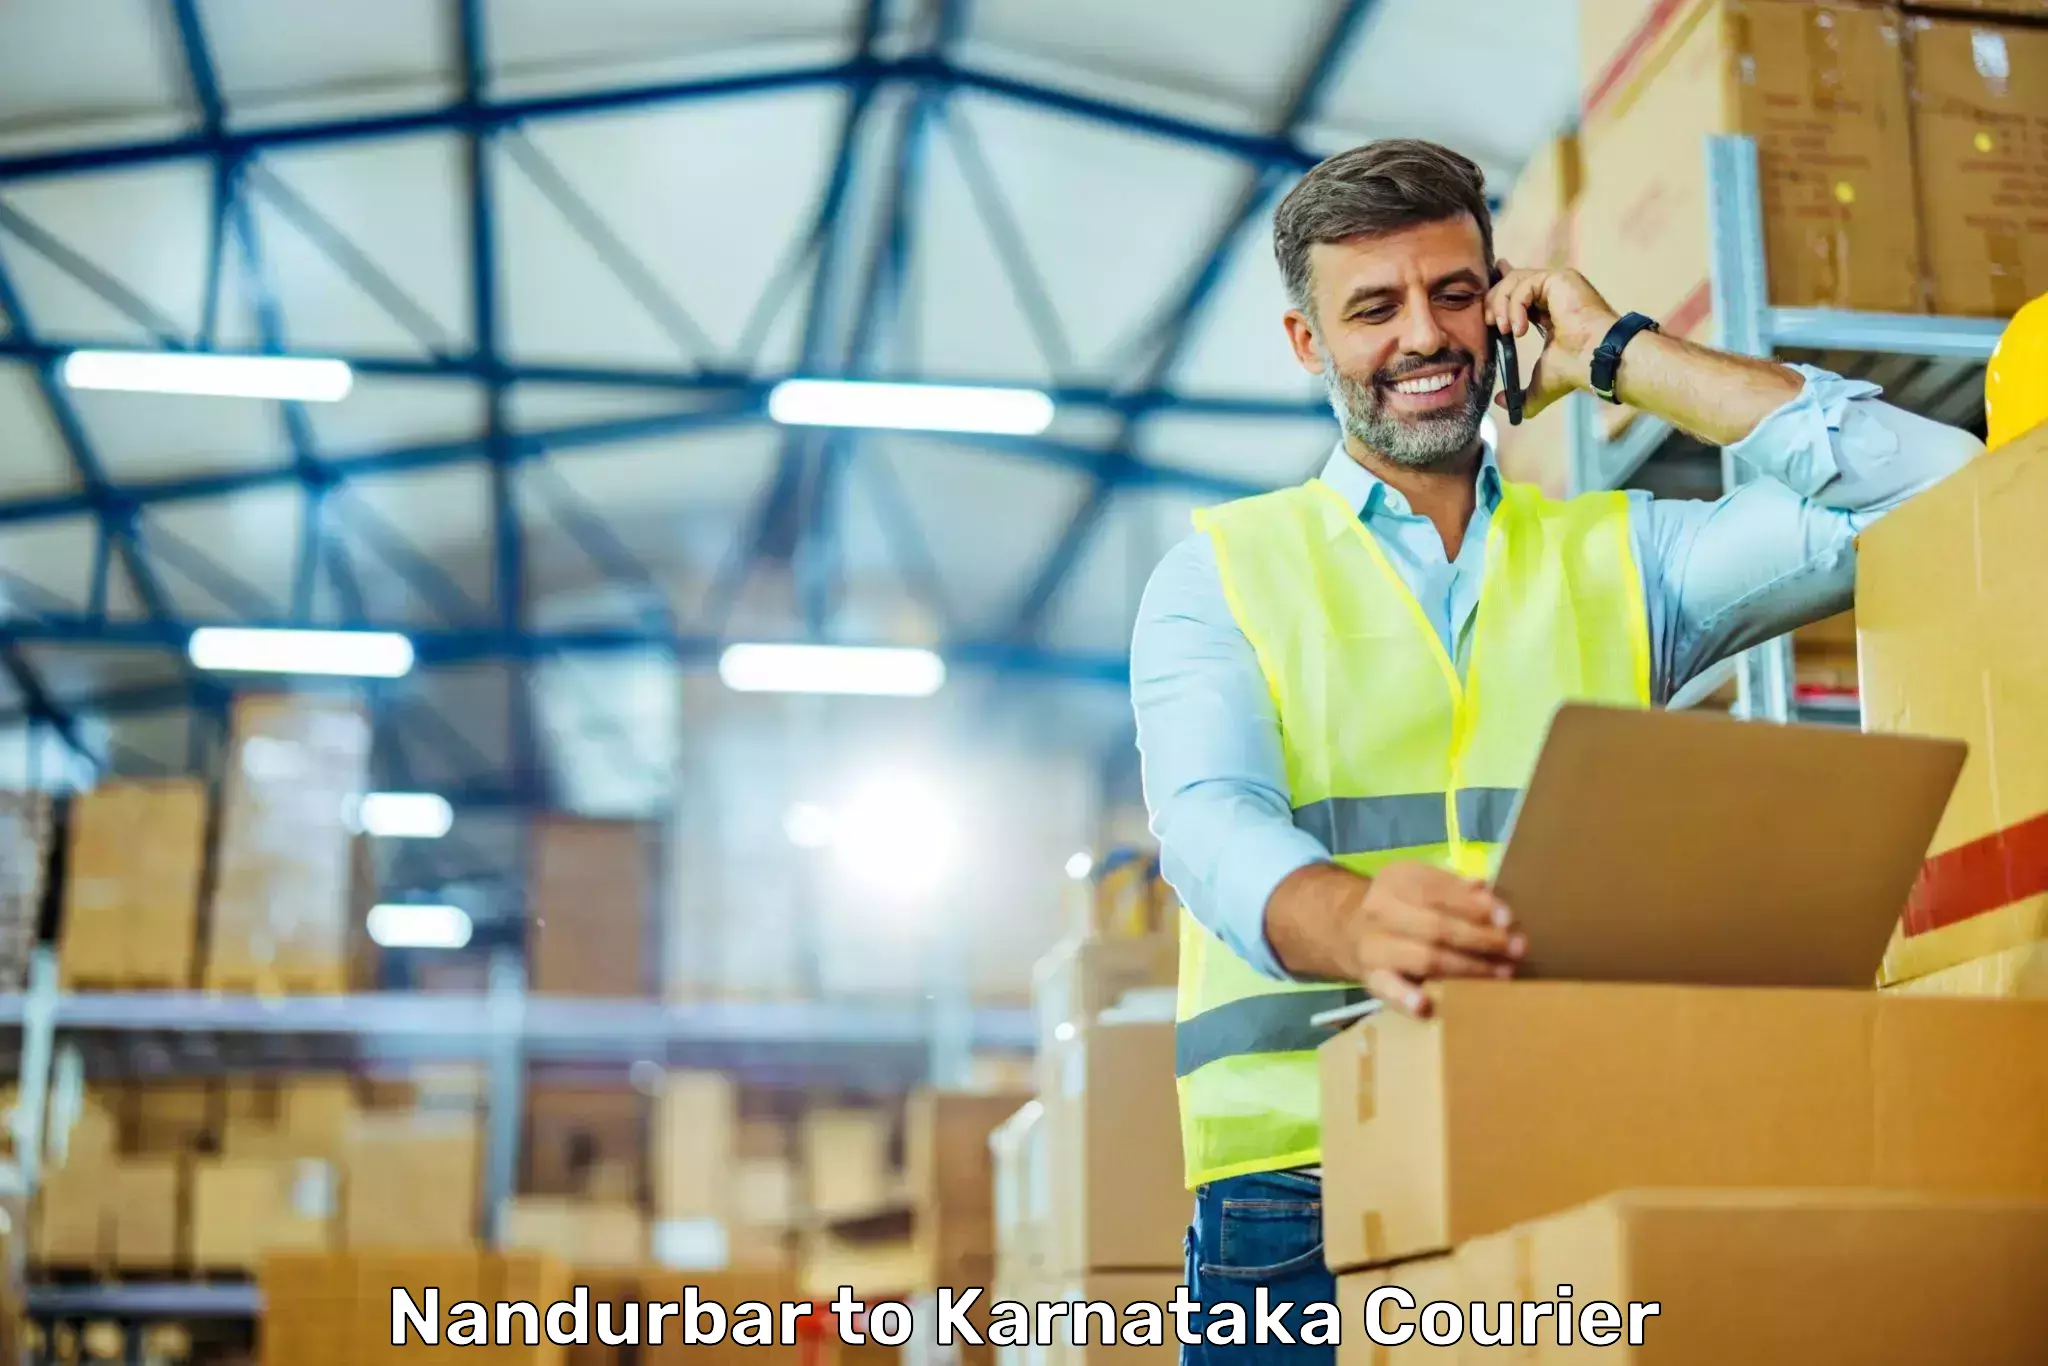 High-priority parcel service Nandurbar to Manipal Academy of Higher Education